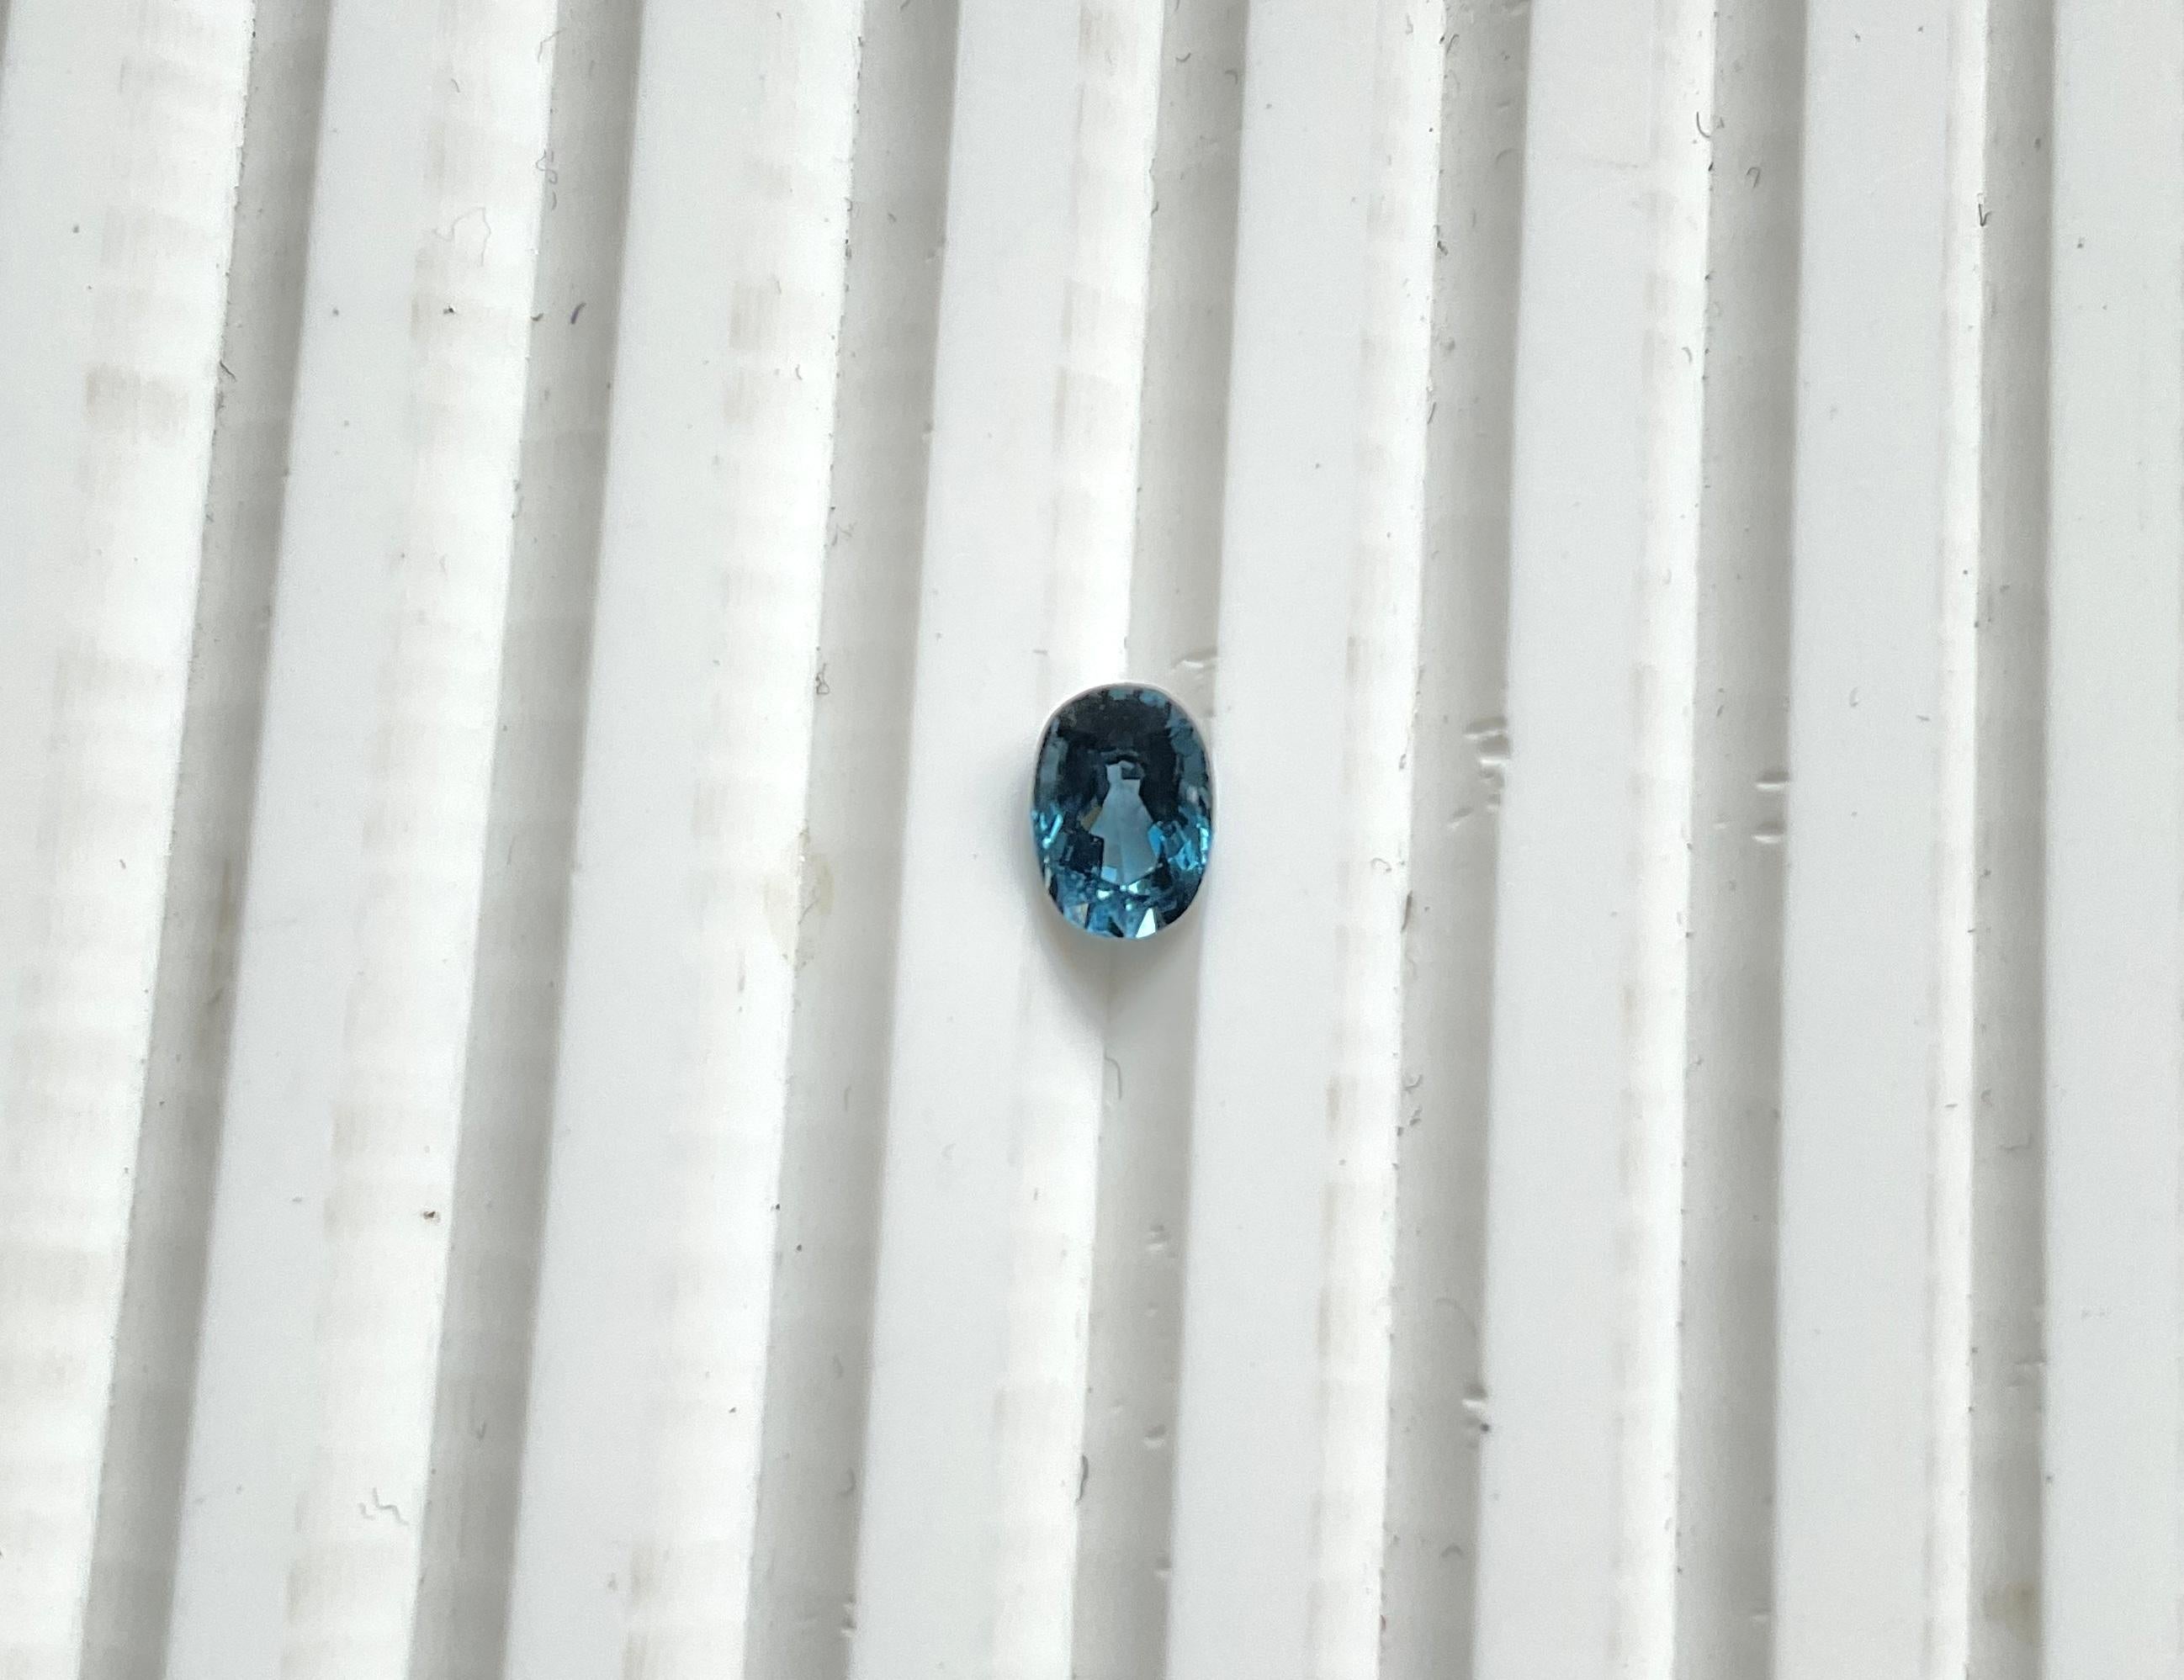 Tanzania Blue Spinel Oval Faceted Natural Cut Stone for Jewelry
Weight - 0.78 Ct
Size - 7x4x3 mm
Shape - Oval
Quantity - 1 Piece